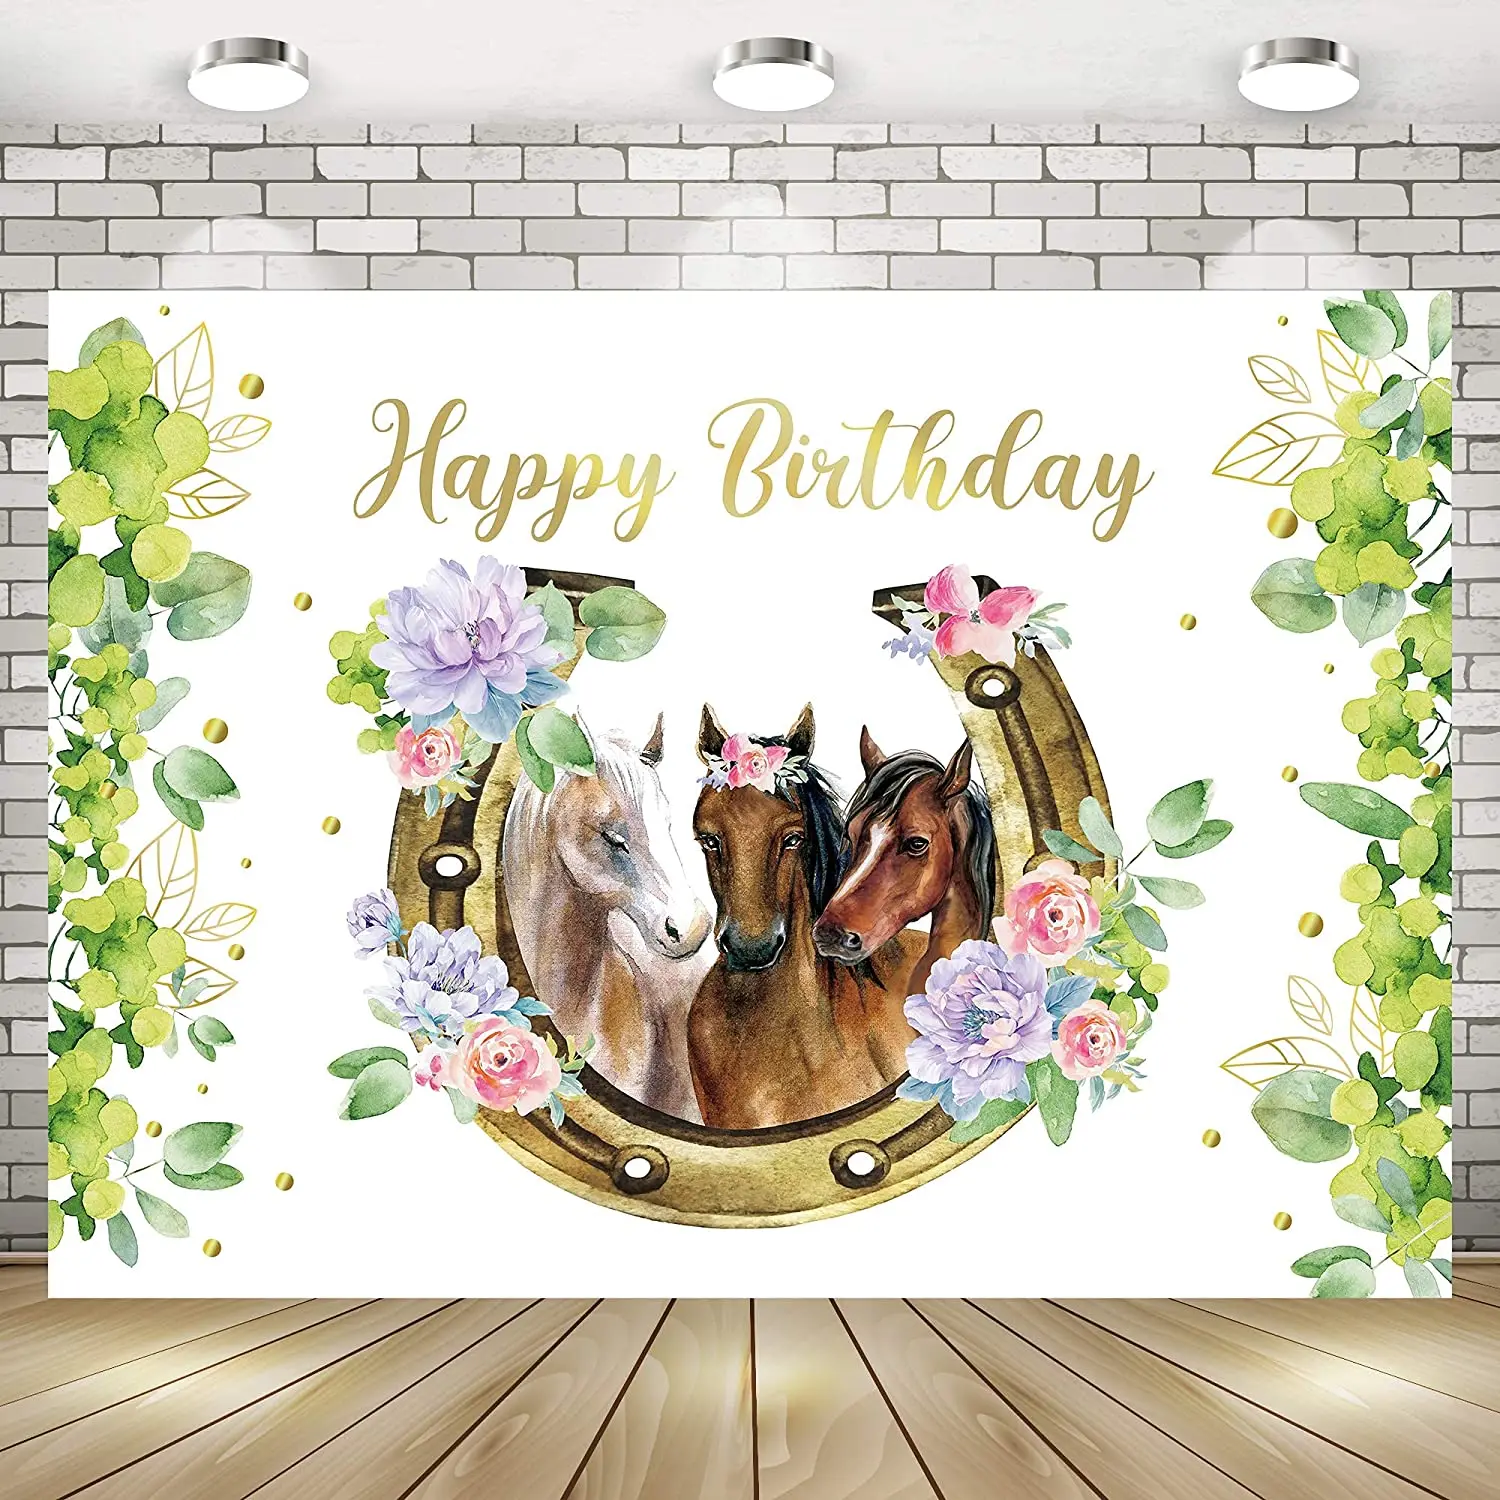 

Horse Birthday Photography Backdrop Feet Floral Cowgirl Flower Western Farm Green Leaves Watercolor Background Photo Shoot Decor